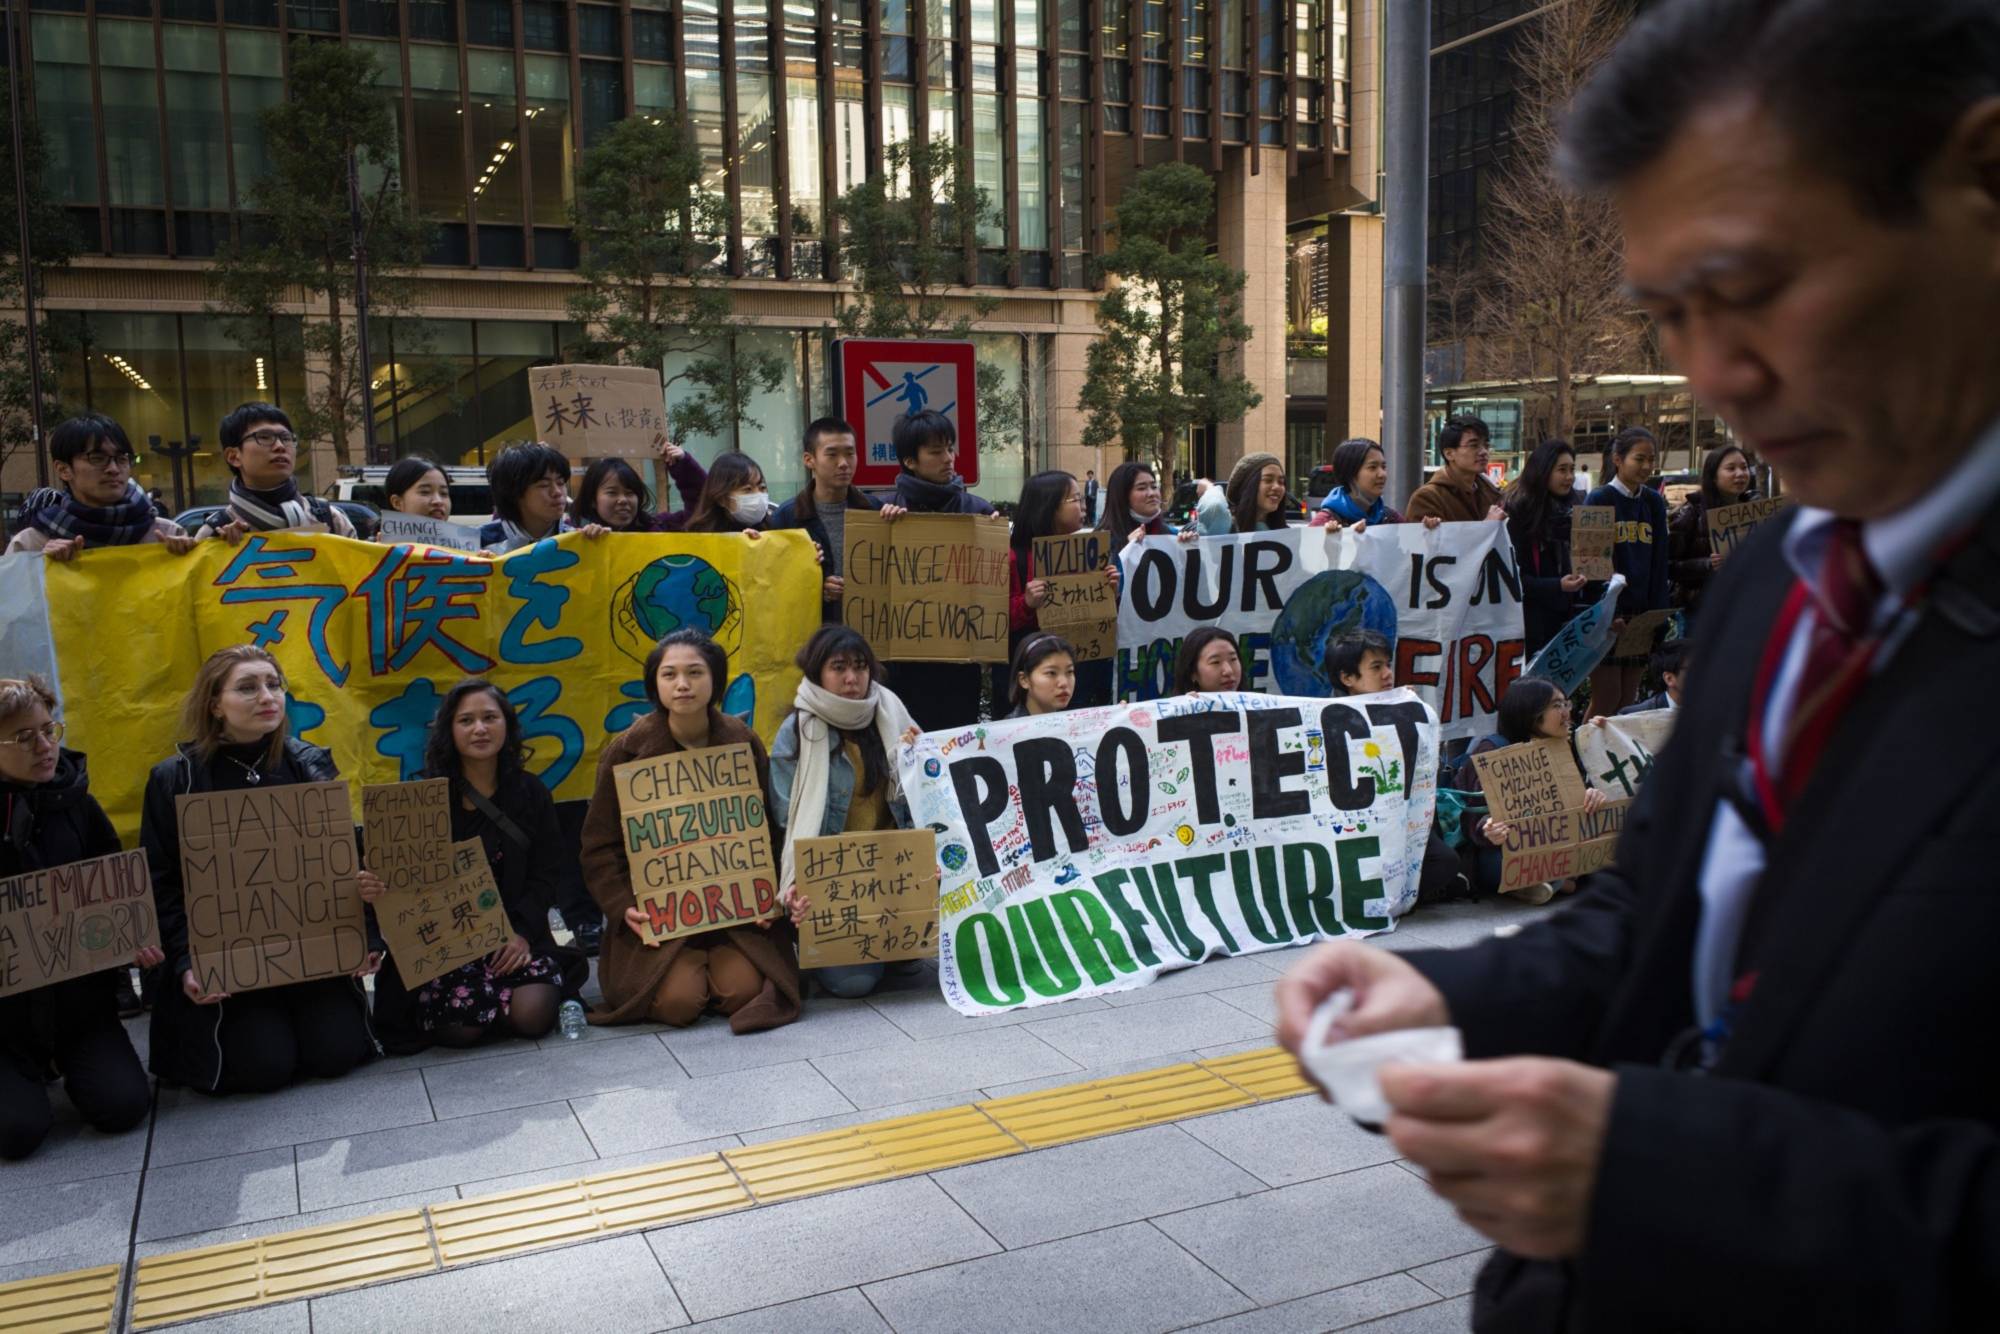 A pedestrian walks past a group of youth climate activists demonstrating outside the Mizuho Financial Group Inc. headquarters in Tokyo in March. The anti-coal demonstration organized by Fridays for Future Tokyo denounced Mizuho Bank's role in financing coal projects globally. | BLOOMBERG